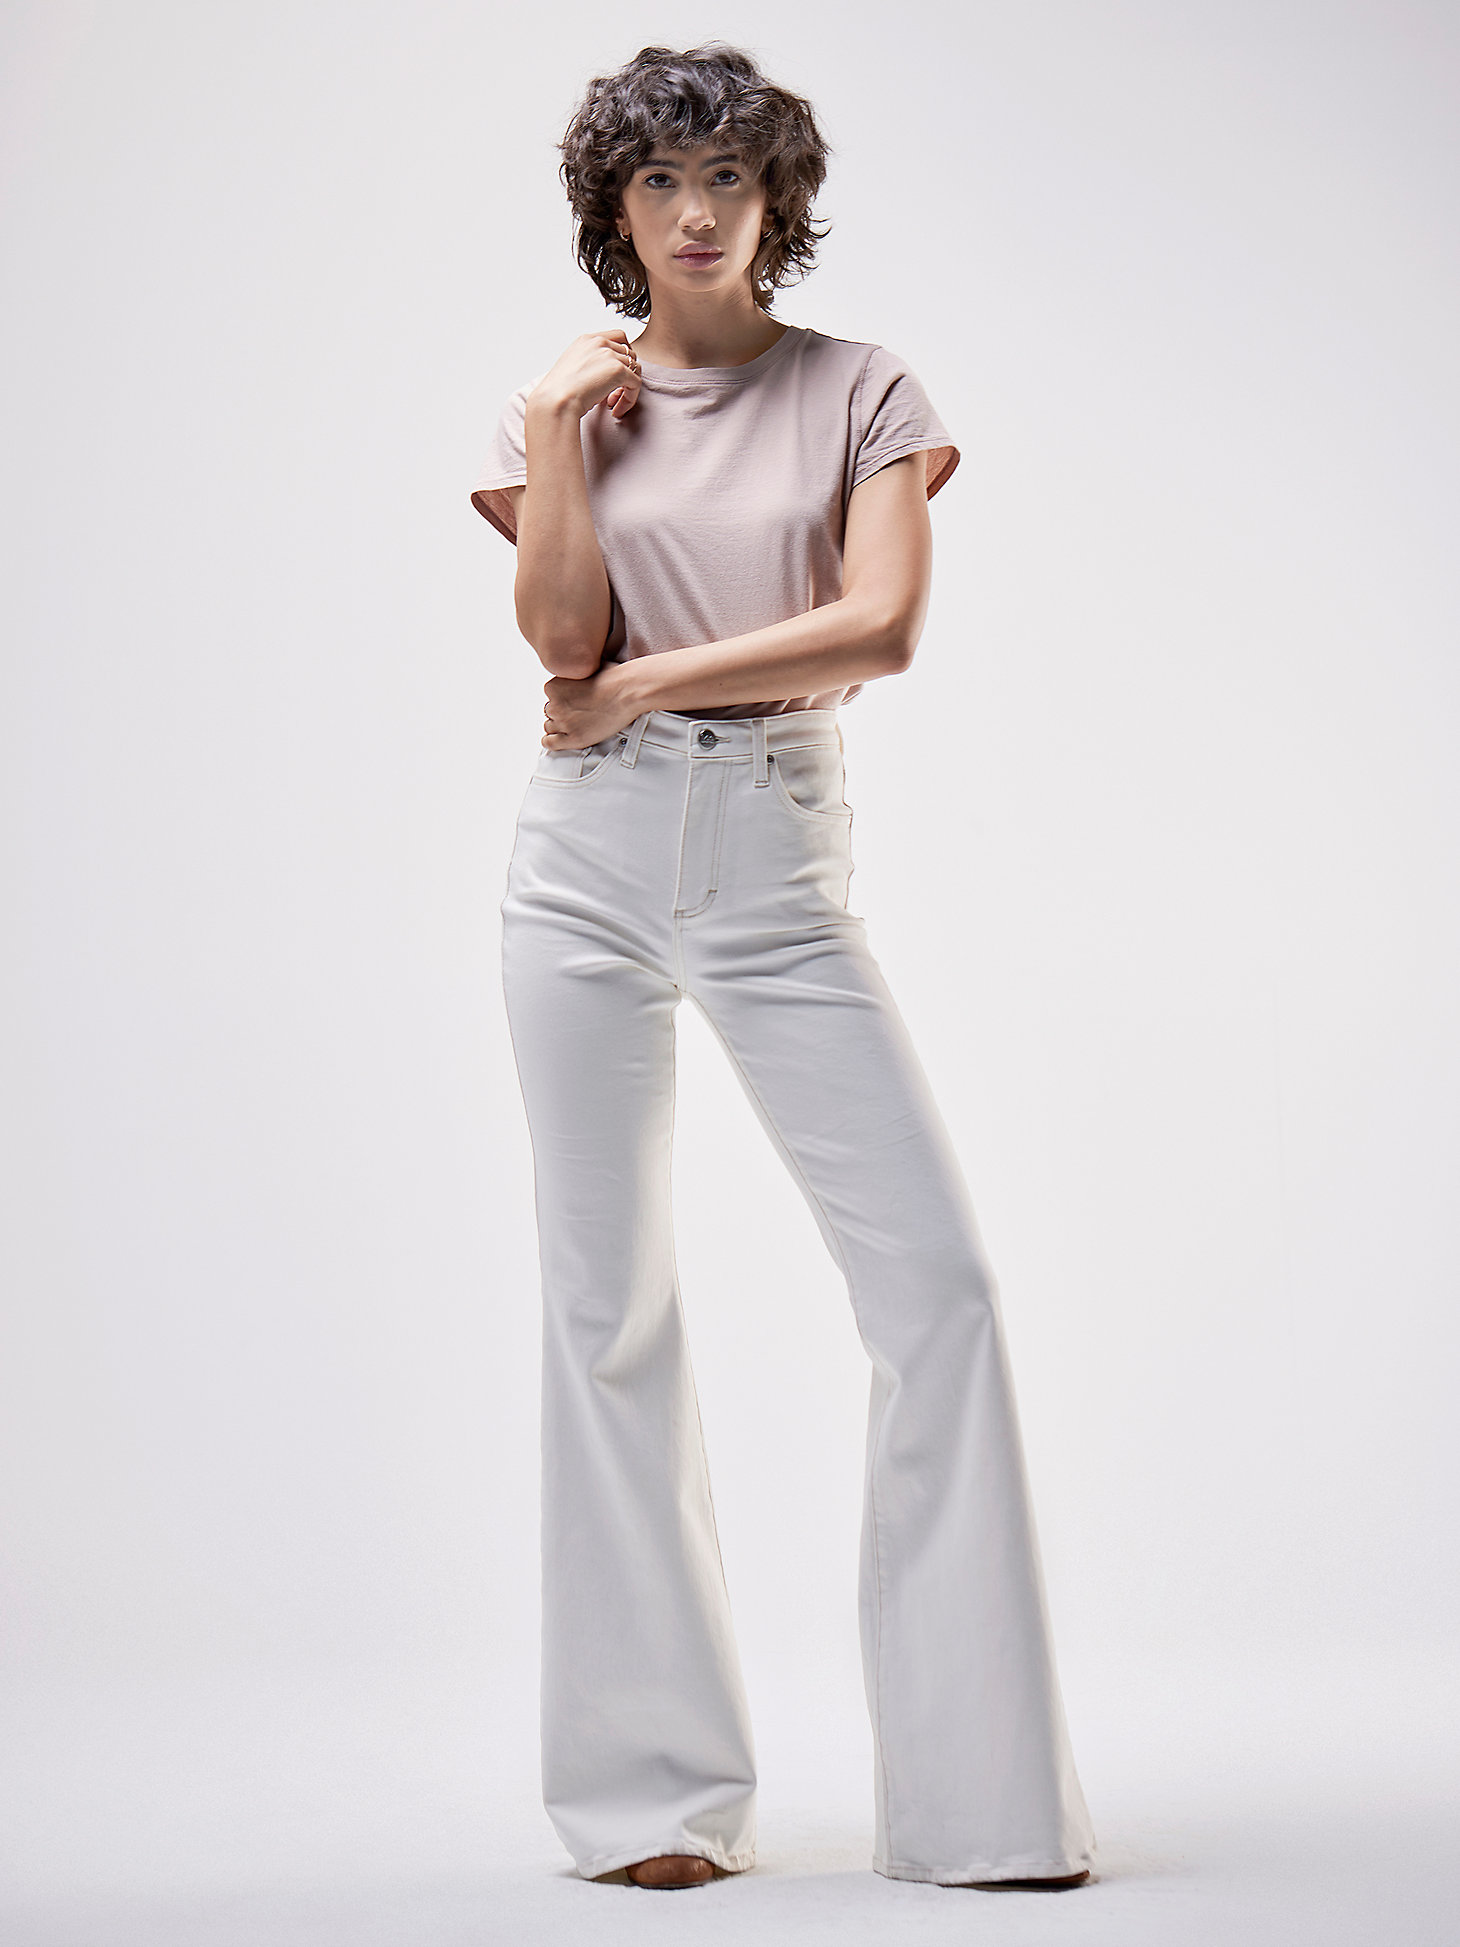 Jeans for Women,Ladies High Rise Flare Pants Button Stretchy Bell Jeans Casual Wide Leg Trousers with Pockets